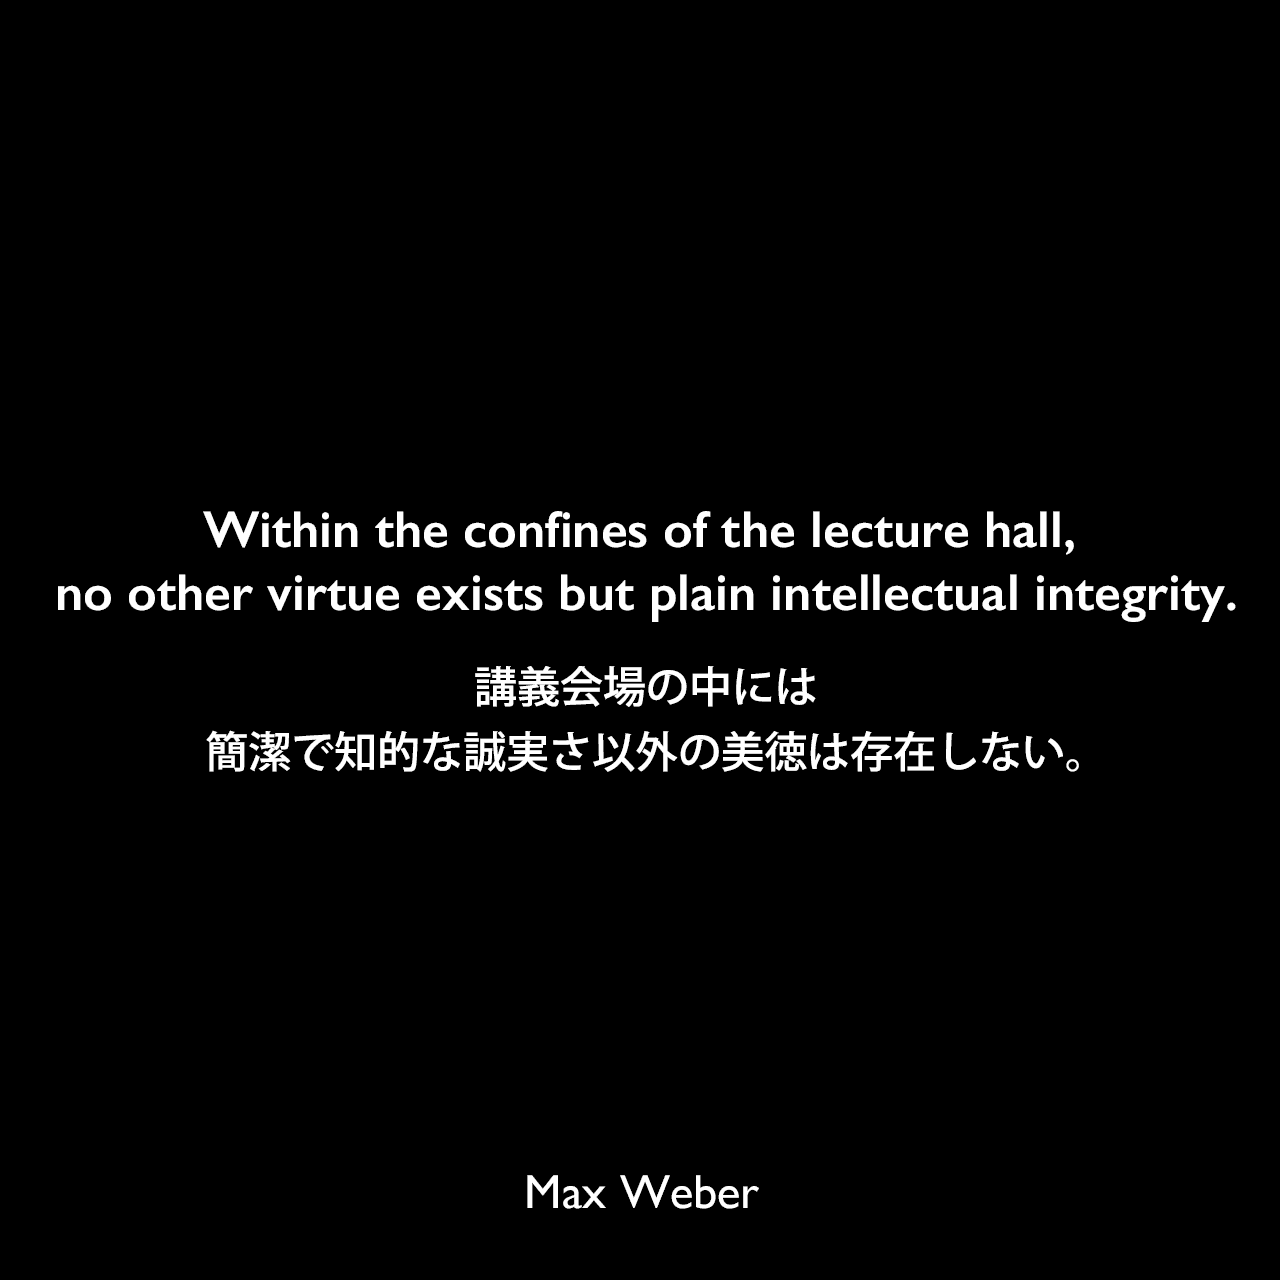 Within the confines of the lecture hall, no other virtue exists but plain intellectual integrity.講義会場の中には、簡潔で知的な誠実さ以外の美徳は存在しない。Max Weber